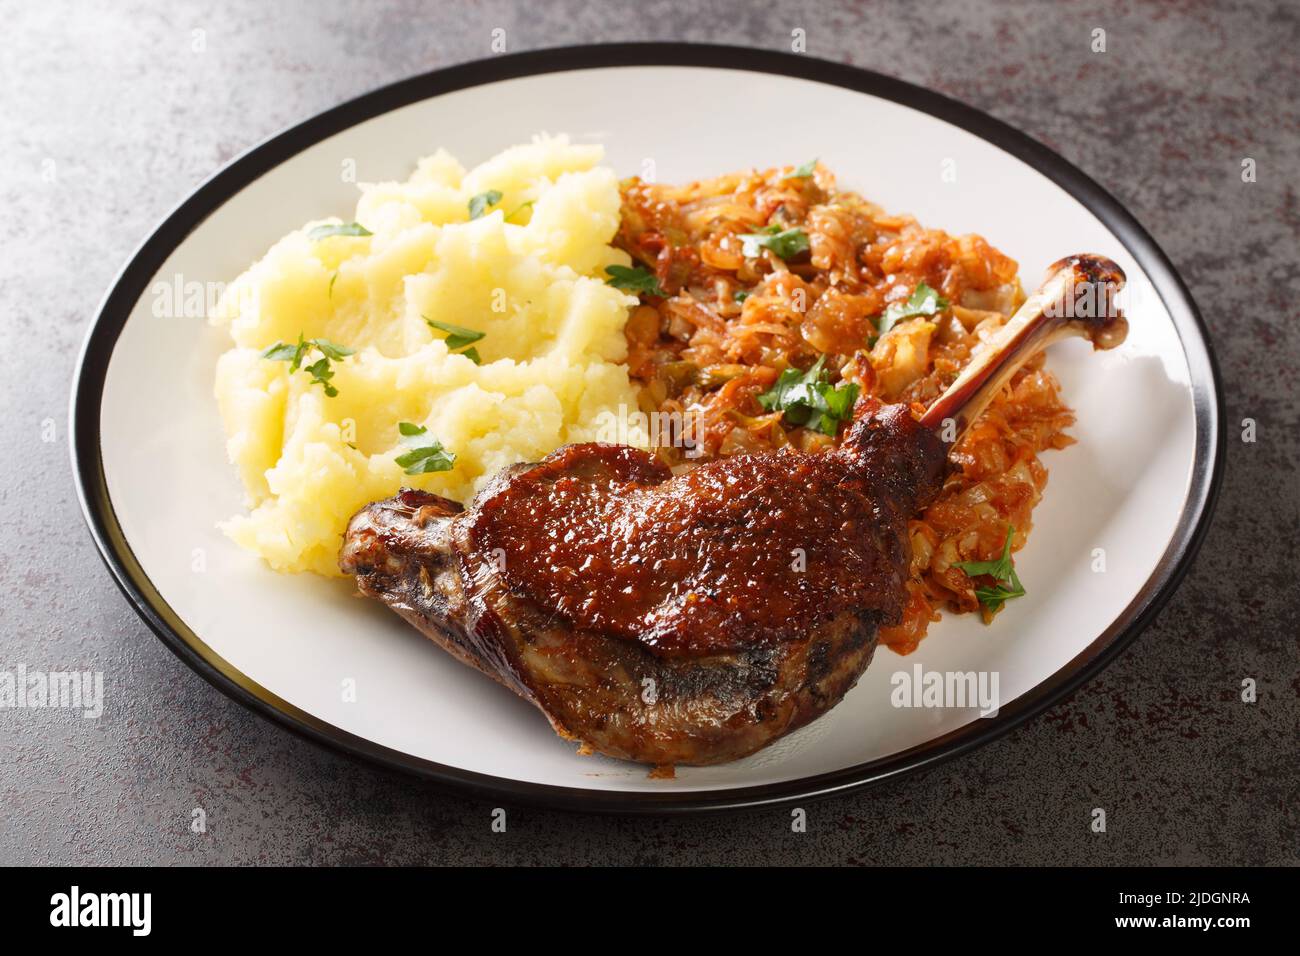 Cooked food roasted duck leg, stew cabbage, boiled potato close-up in a plate on the table. Horizontal Stock Photo